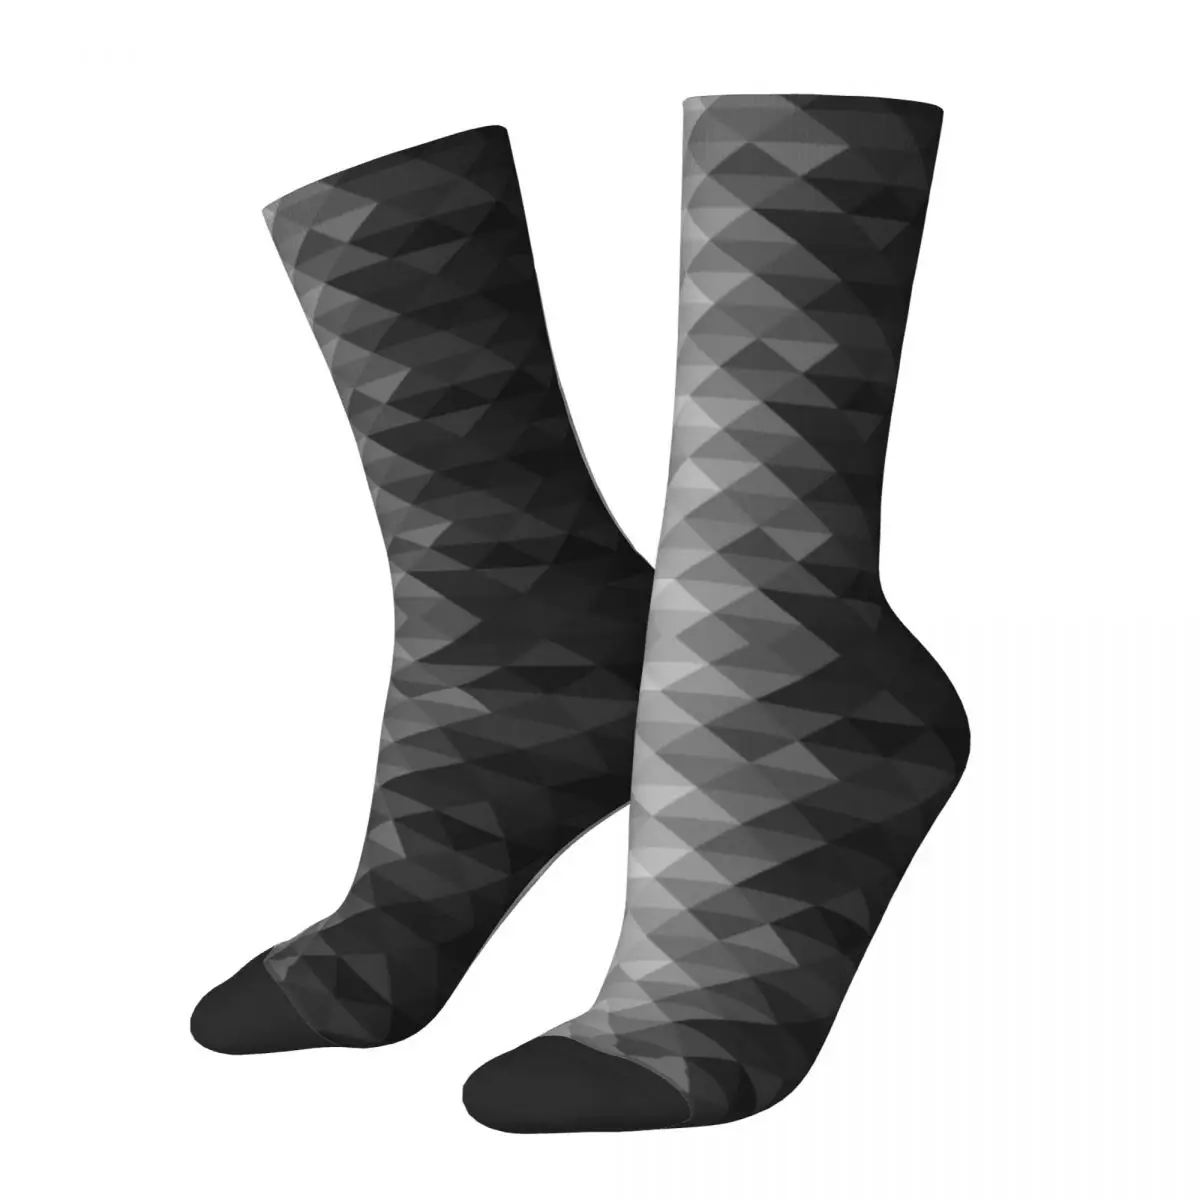 

Grayscale Triangle Geometric Squares Pattern R92 Stocking Top Quality The Best Buy Humor Graphic Color contrast Elastic Socks